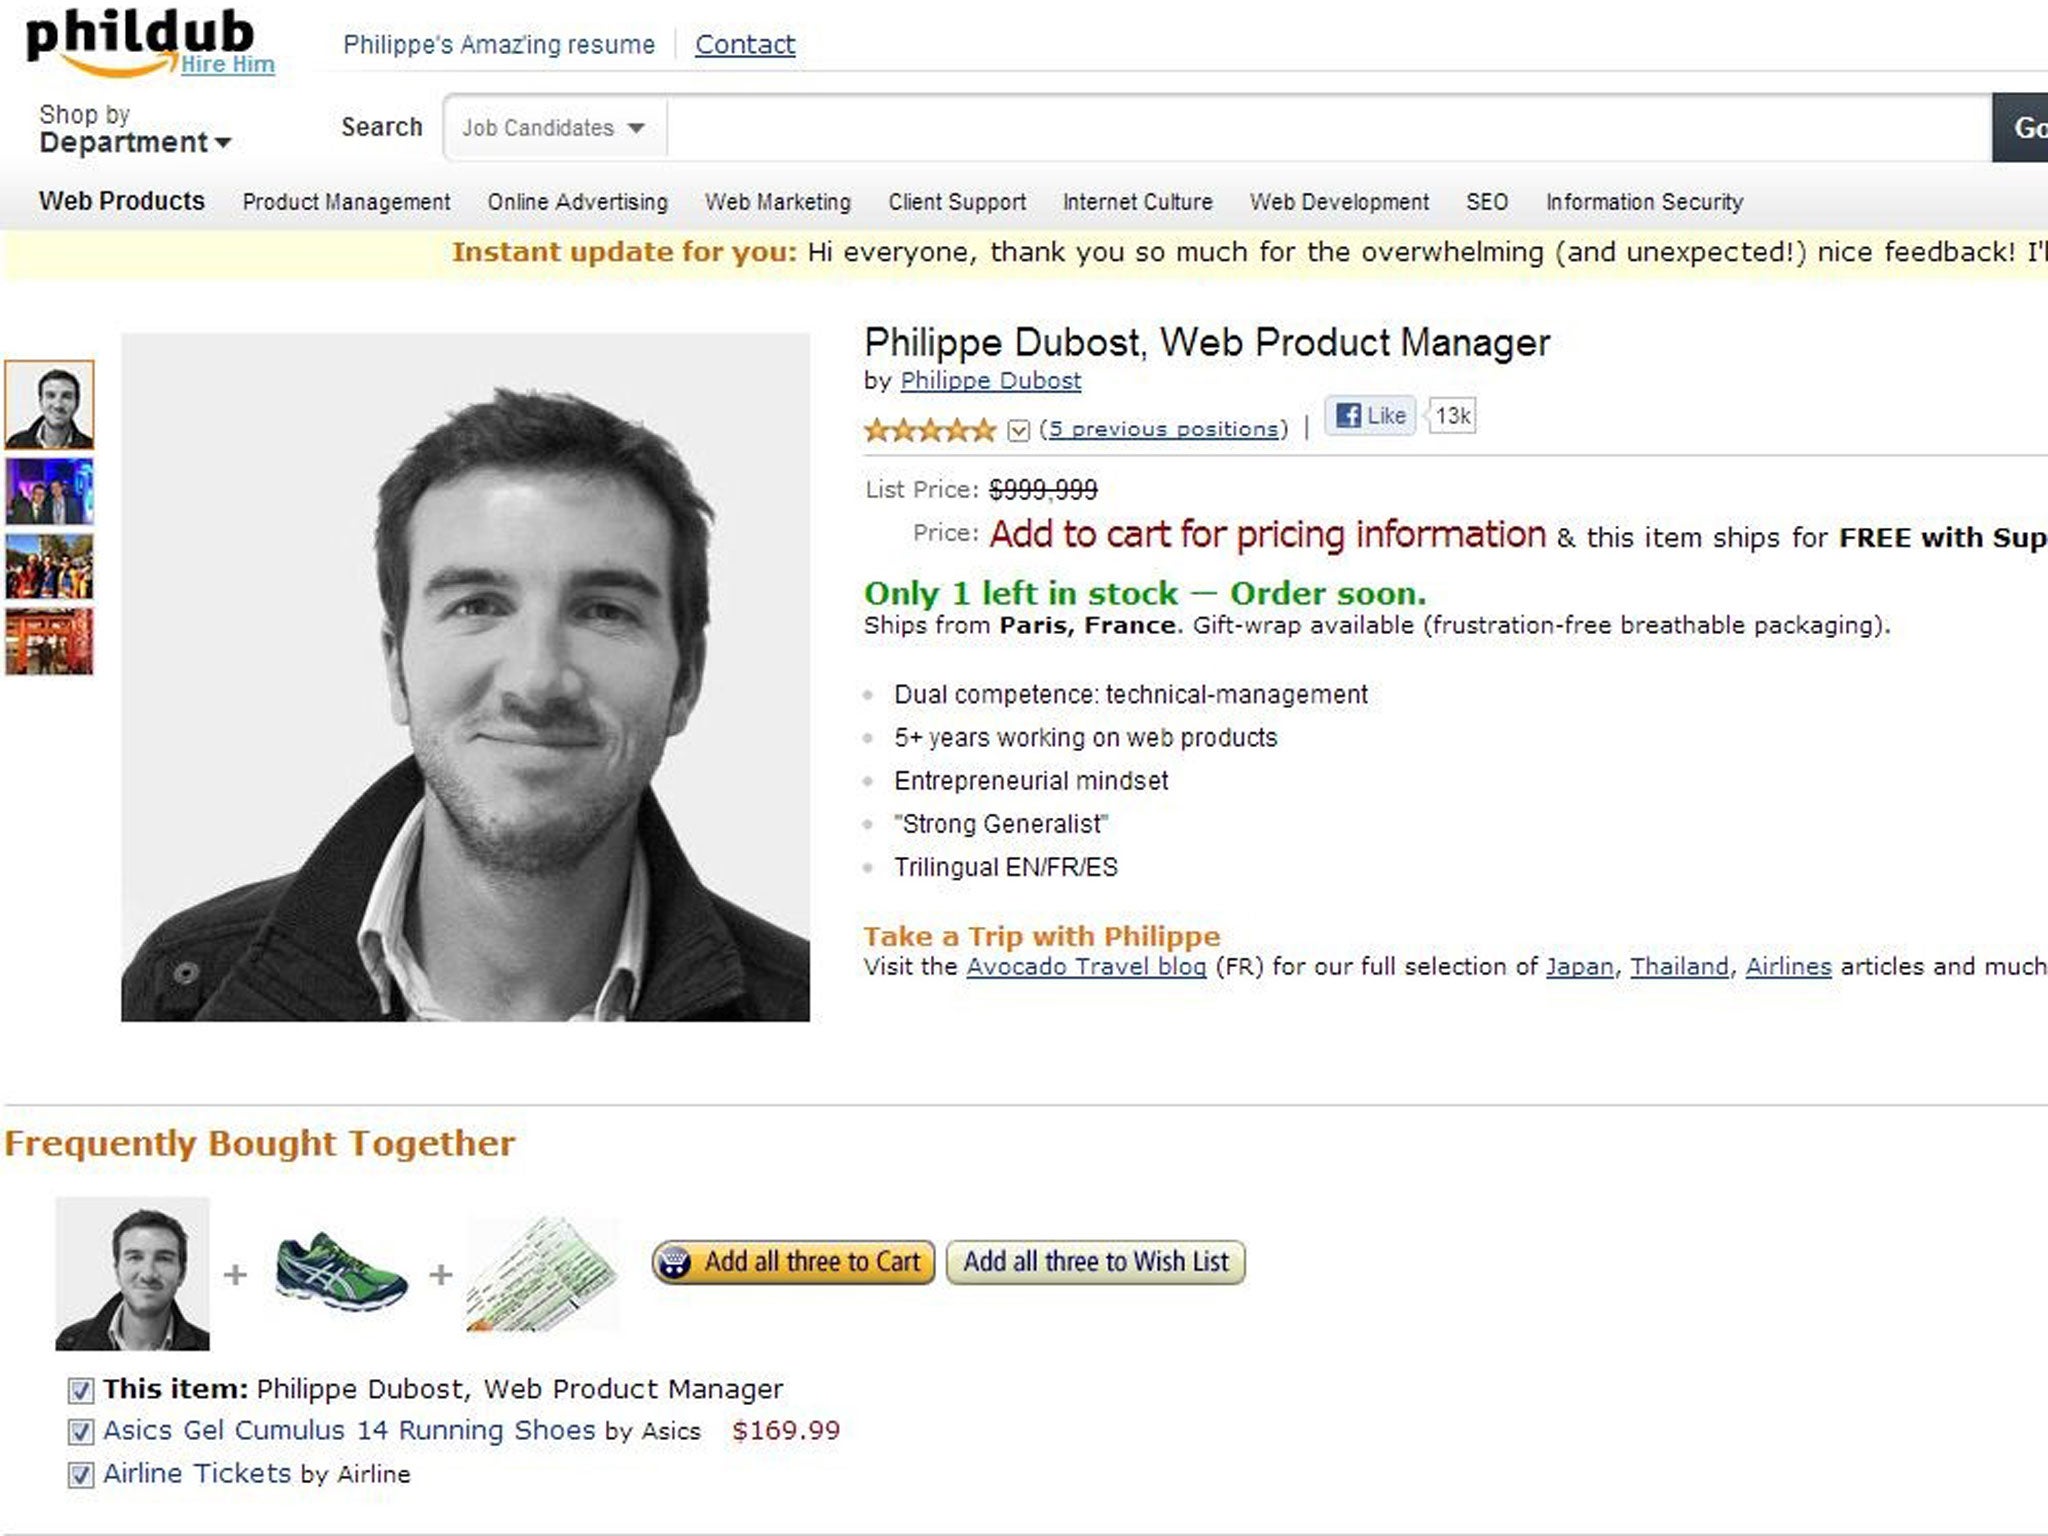 Self-promotion: Philippe Dubost’s fake Amazon page has attracted more than 100 potential employers